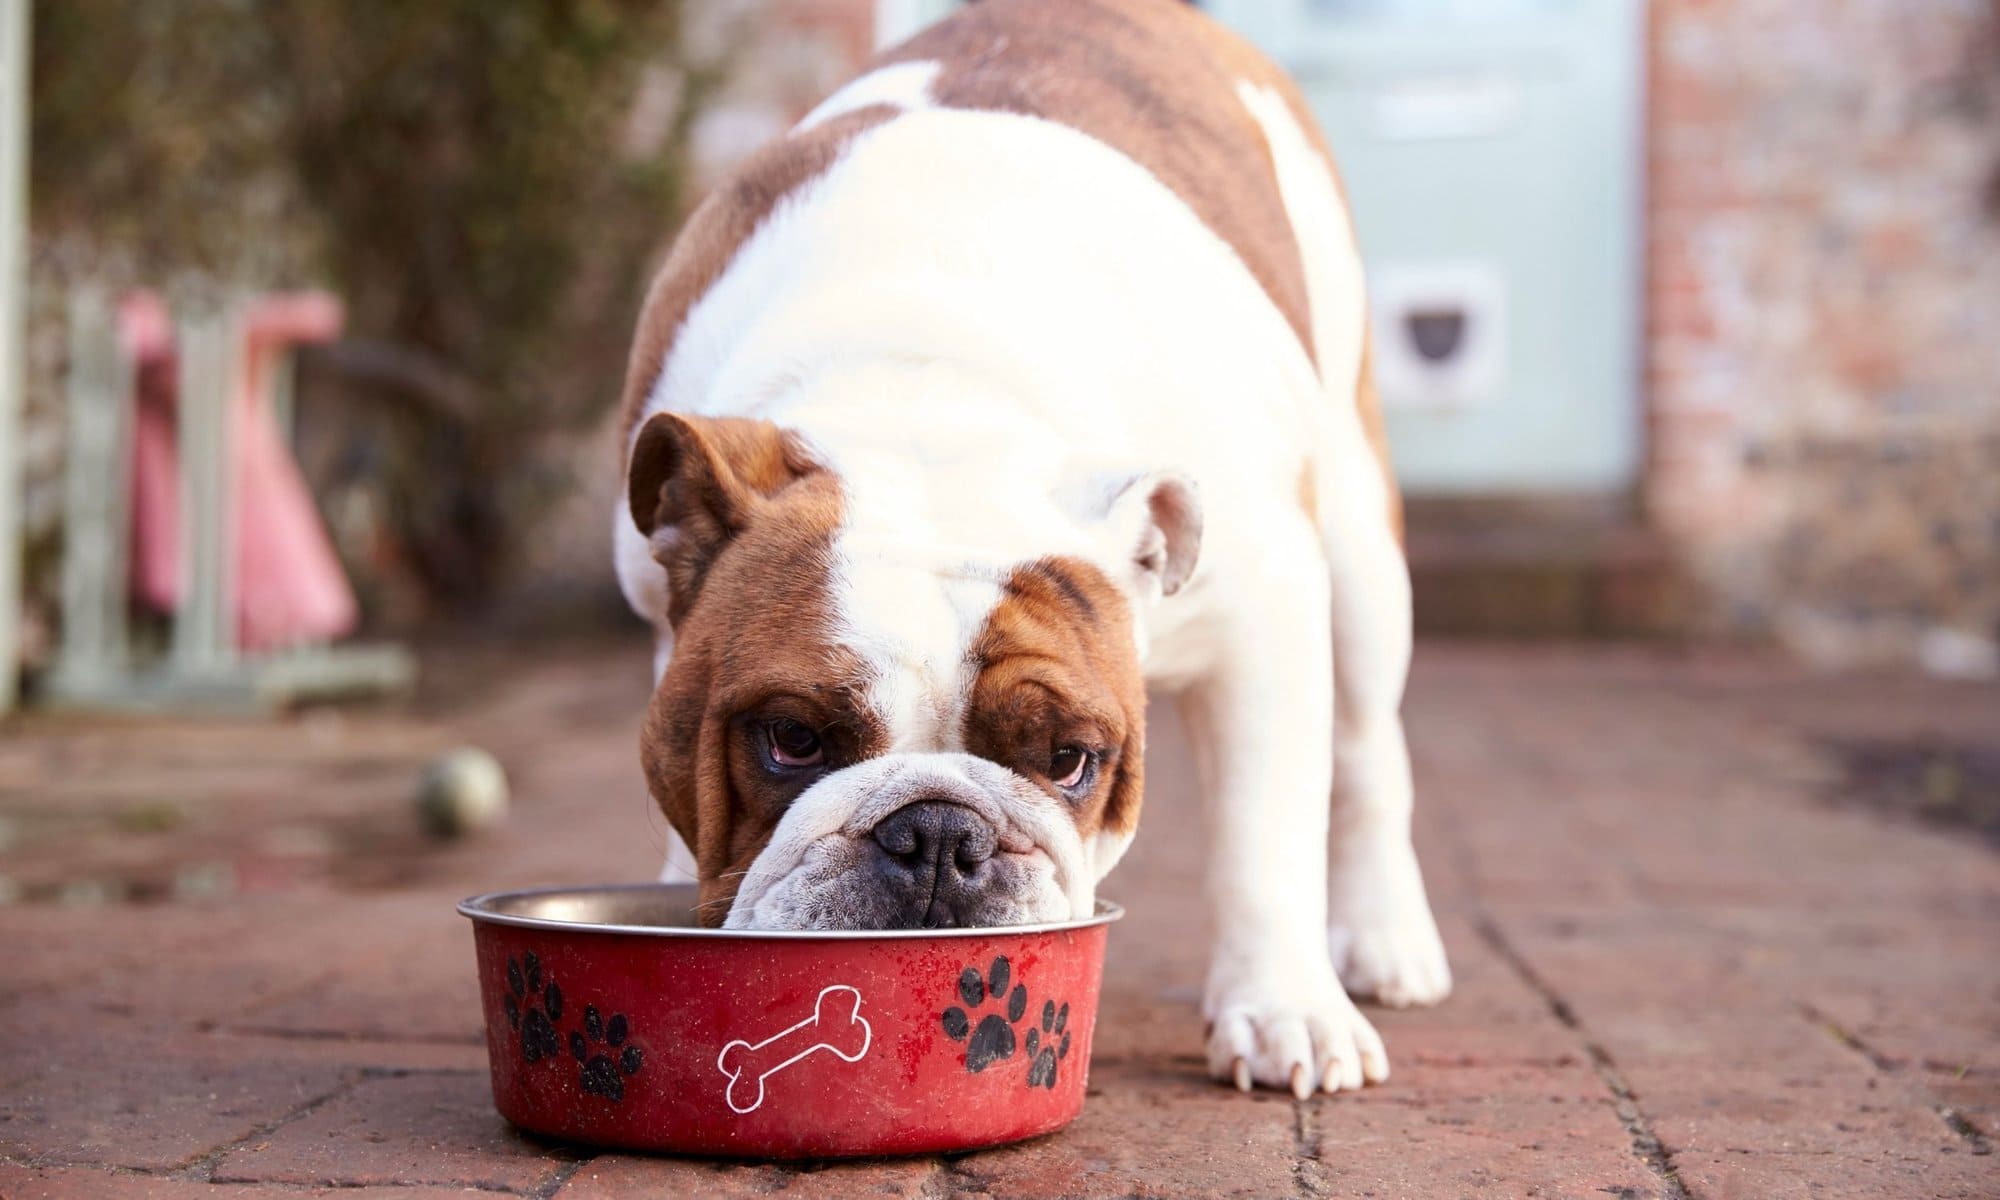 A dog eating from a red bowl